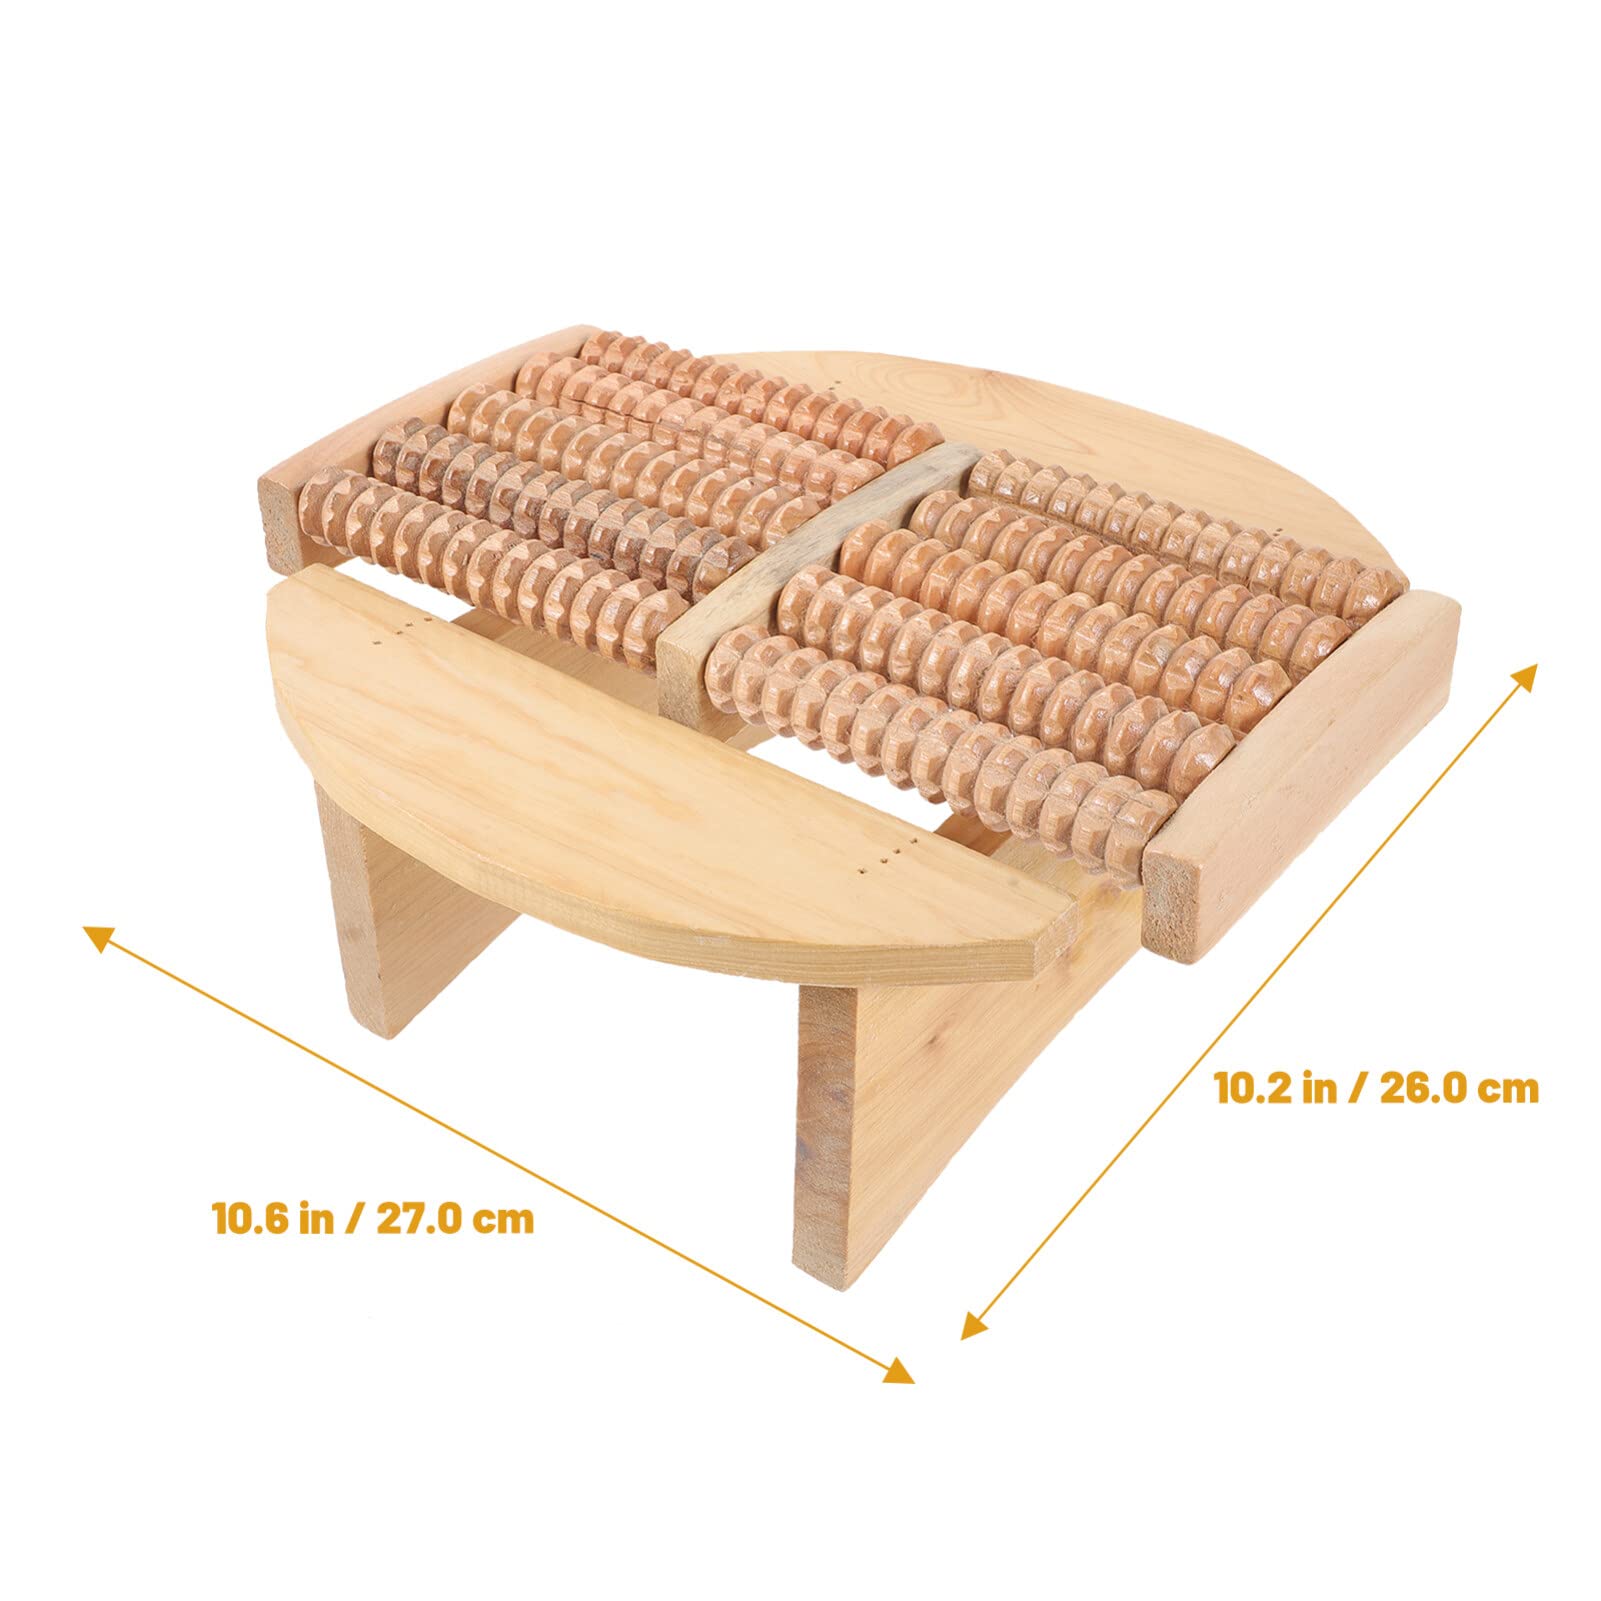 Healifty Sauna Stool Foot Tool Wood Step Footstool Wooden Foot Massager Foot Rest Bath Foot Massager Toilet Stool Gifts Portable Step Stool Sauna Wood footrest Under The Table Solid Wood